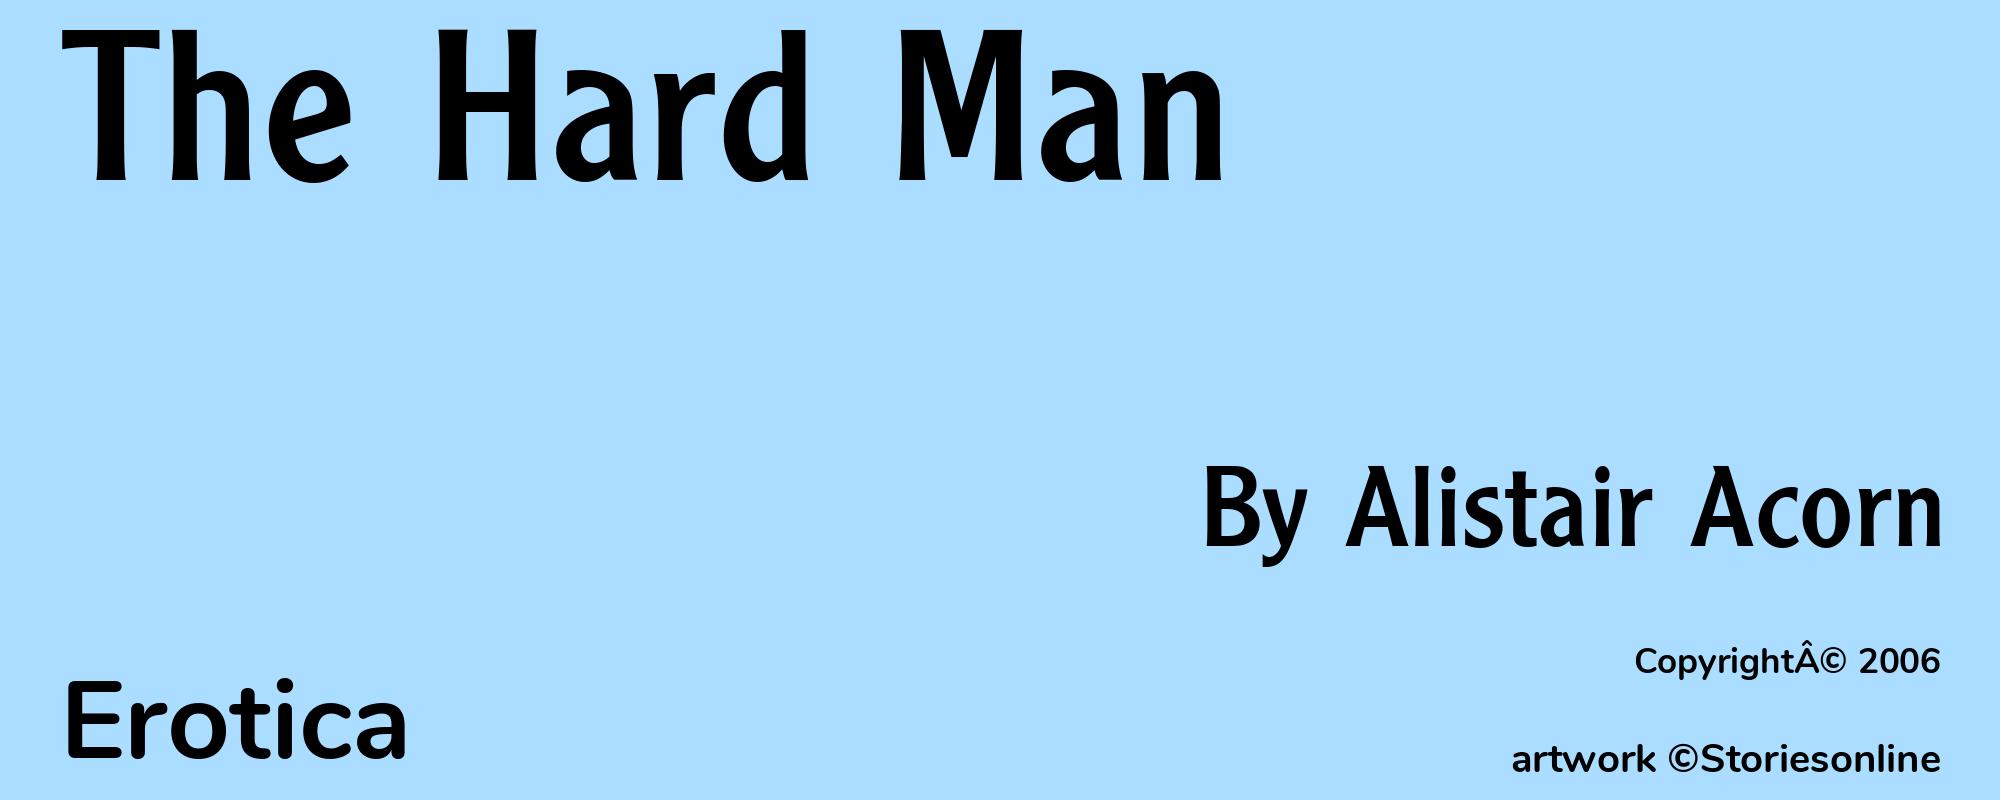 The Hard Man - Cover